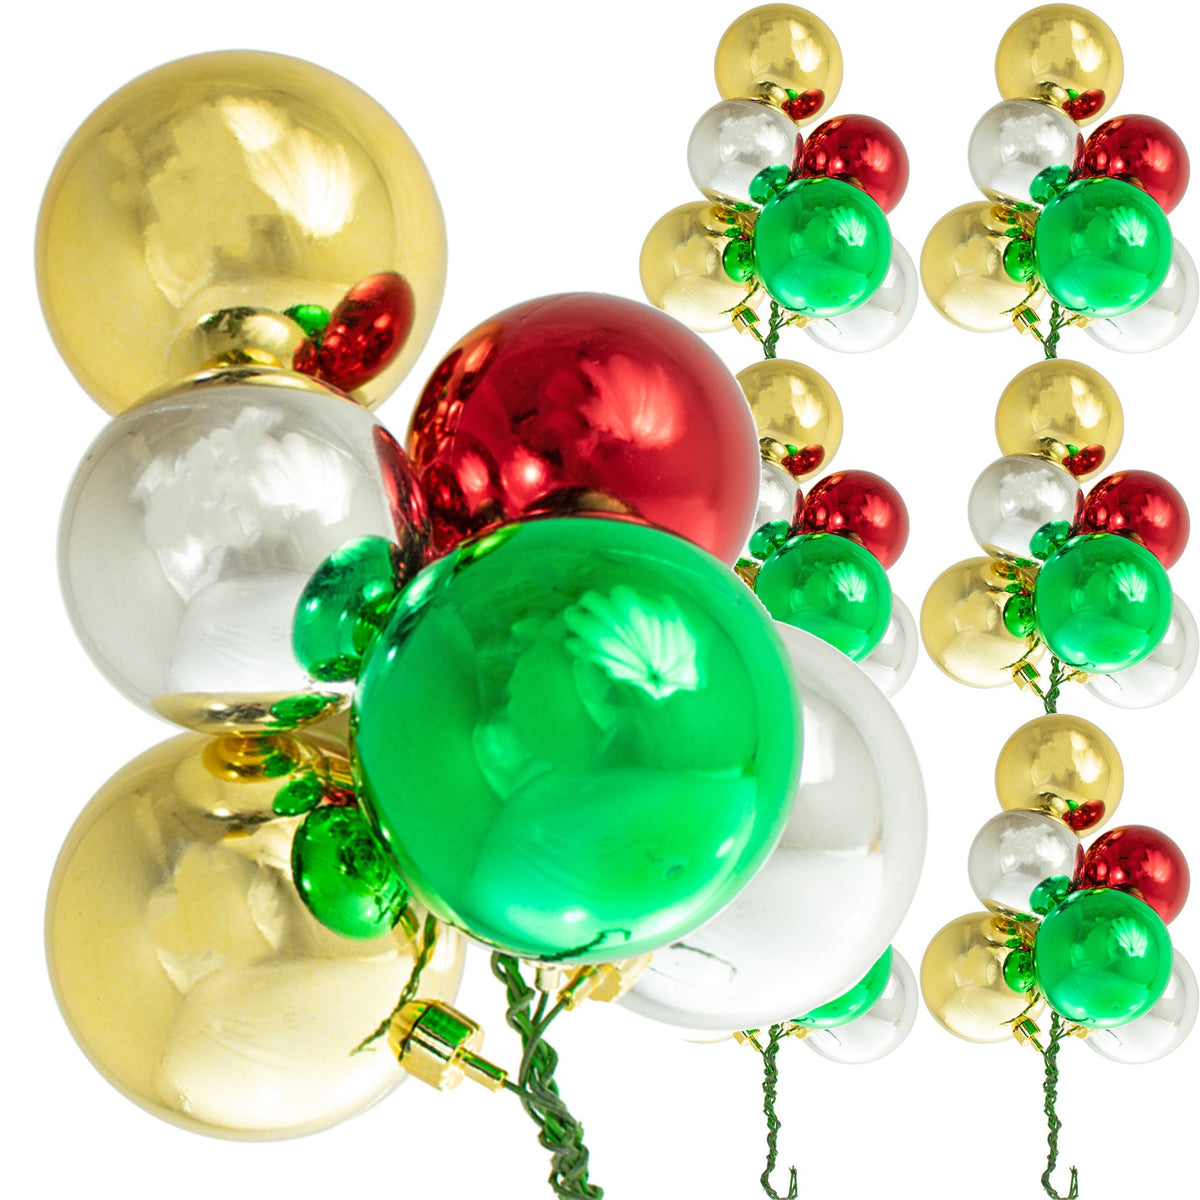 The Stockton Christmas Ball Clusters with Shiny Multi-Color Ornaments are sold in sets of 6 from Lee Display